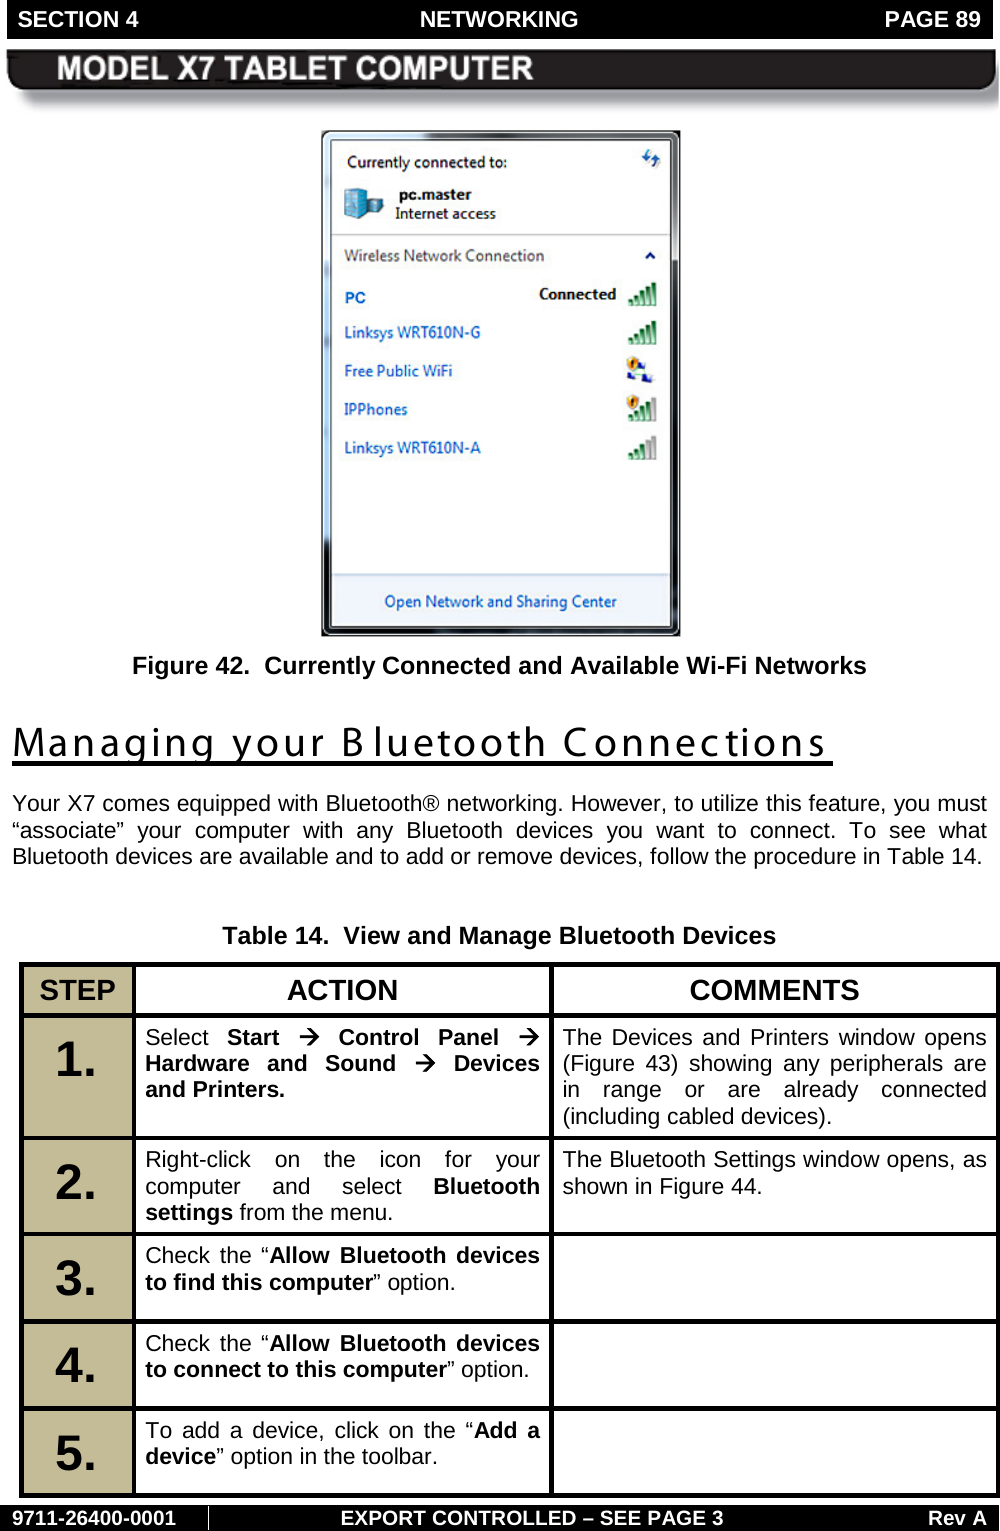 SECTION 4 NETWORKING  PAGE 89        9711-26400-0001 EXPORT CONTROLLED – SEE PAGE 3 Rev A  Figure 42.  Currently Connected and Available Wi-Fi Networks Managing your B luetooth Connections Your X7 comes equipped with Bluetooth® networking. However, to utilize this feature, you must “associate”  your computer  with any Bluetooth devices you want to connect.  To see what Bluetooth devices are available and to add or remove devices, follow the procedure in Table 14.  Table 14.  View and Manage Bluetooth Devices STEP  ACTION COMMENTS 1.   Select  Start à Control Panel à Hardware and Sound à Devices and Printers. The Devices and Printers window opens (Figure  43) showing any peripherals are in range or are already connected (including cabled devices). 2.   Right-click on the icon for your computer and select Bluetooth settings from the menu. The Bluetooth Settings window opens, as shown in Figure 44. 3.   Check the “Allow Bluetooth devices to find this computer” option.  4.   Check the “Allow Bluetooth devices to connect to this computer” option.  5.   To add a device, click on the “Add a device” option in the toolbar.   